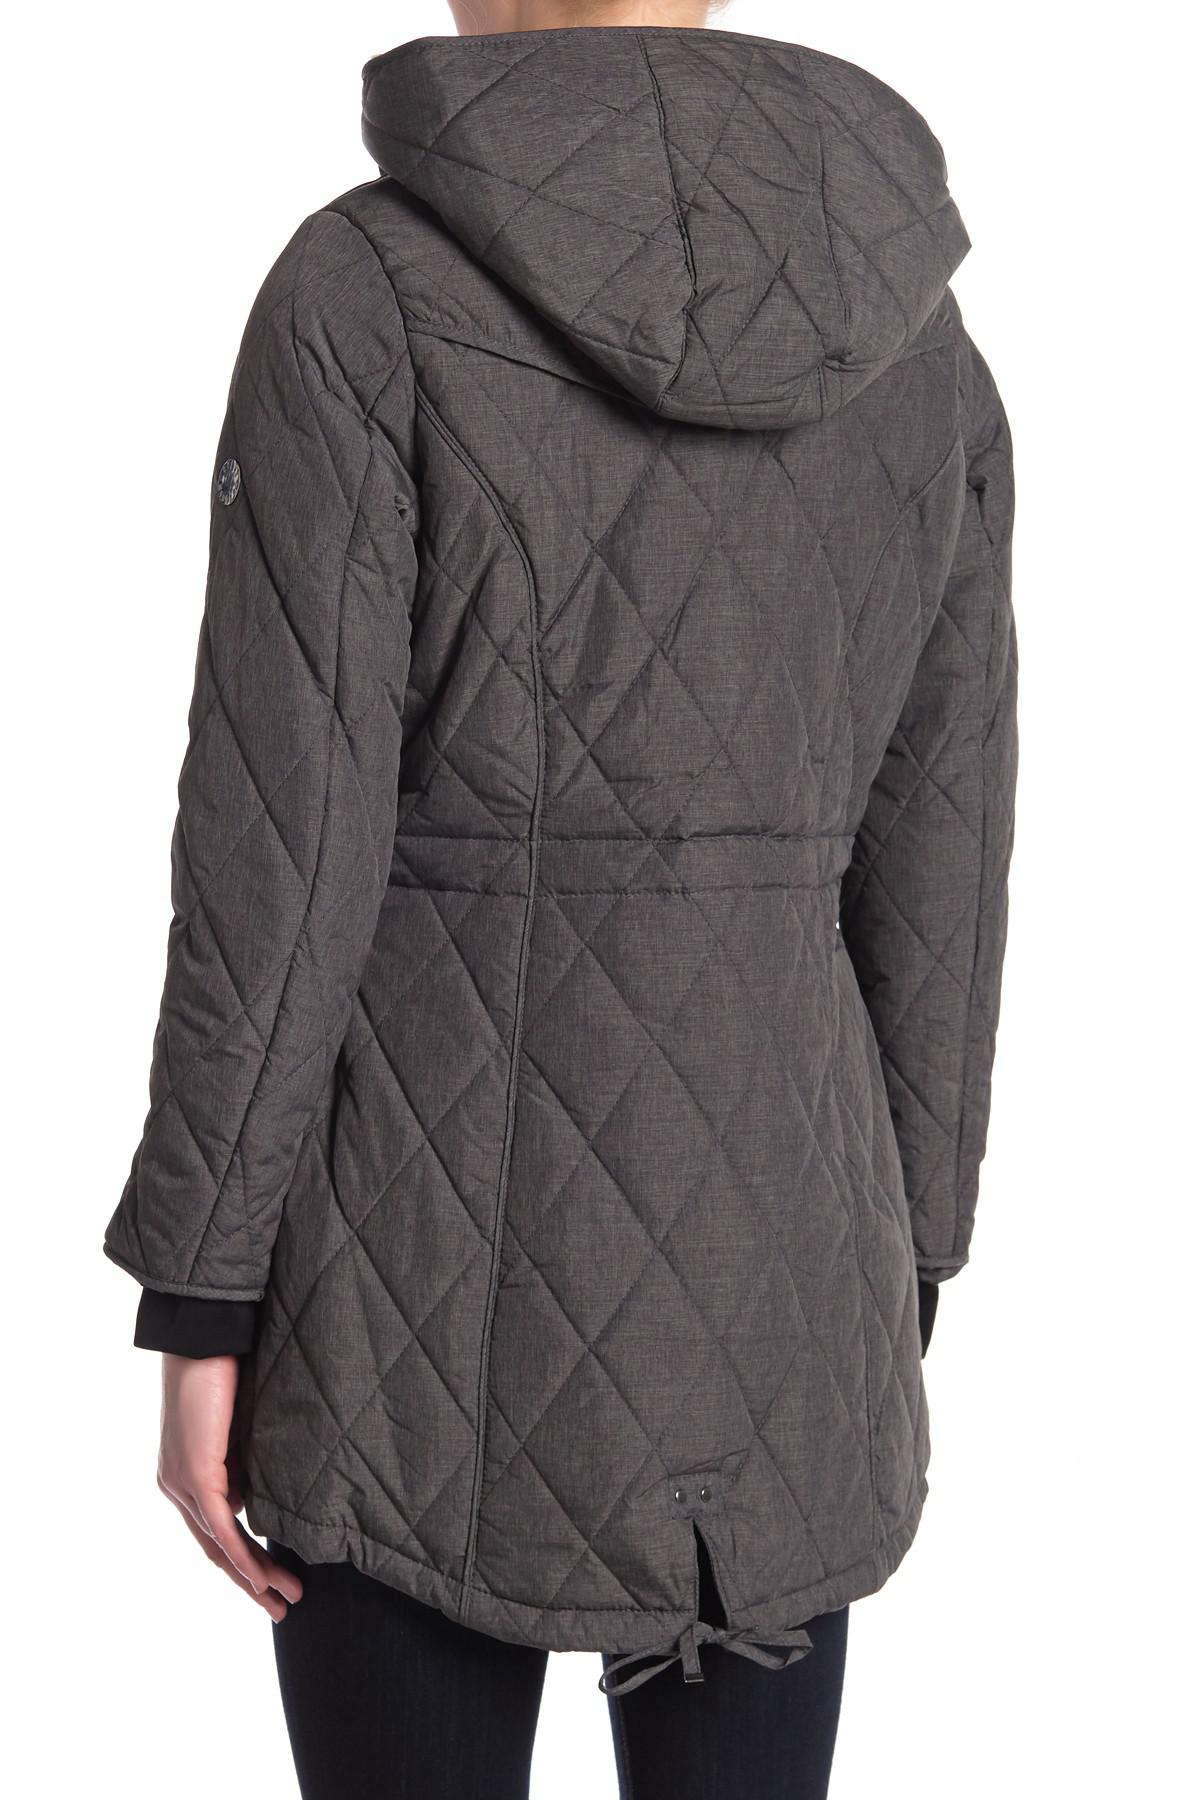 Lyst - Steve Madden Quilted Faux Shearling Hood Jacket in Gray